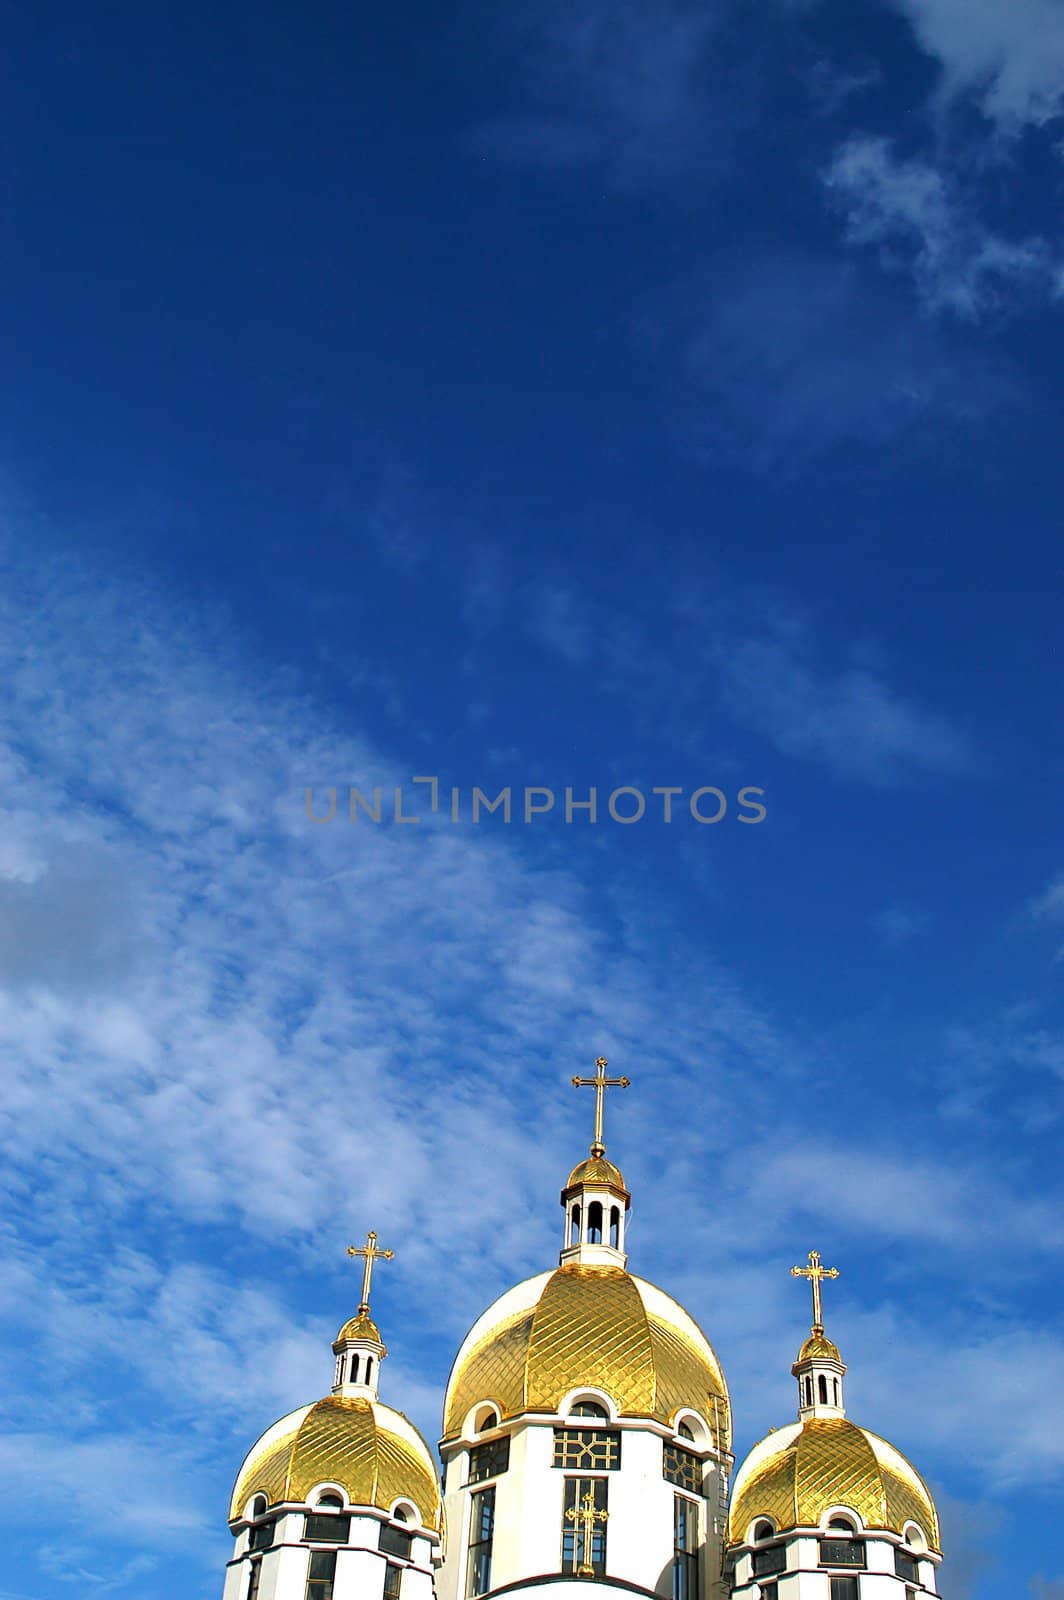 An image of a churches on a background of clouds